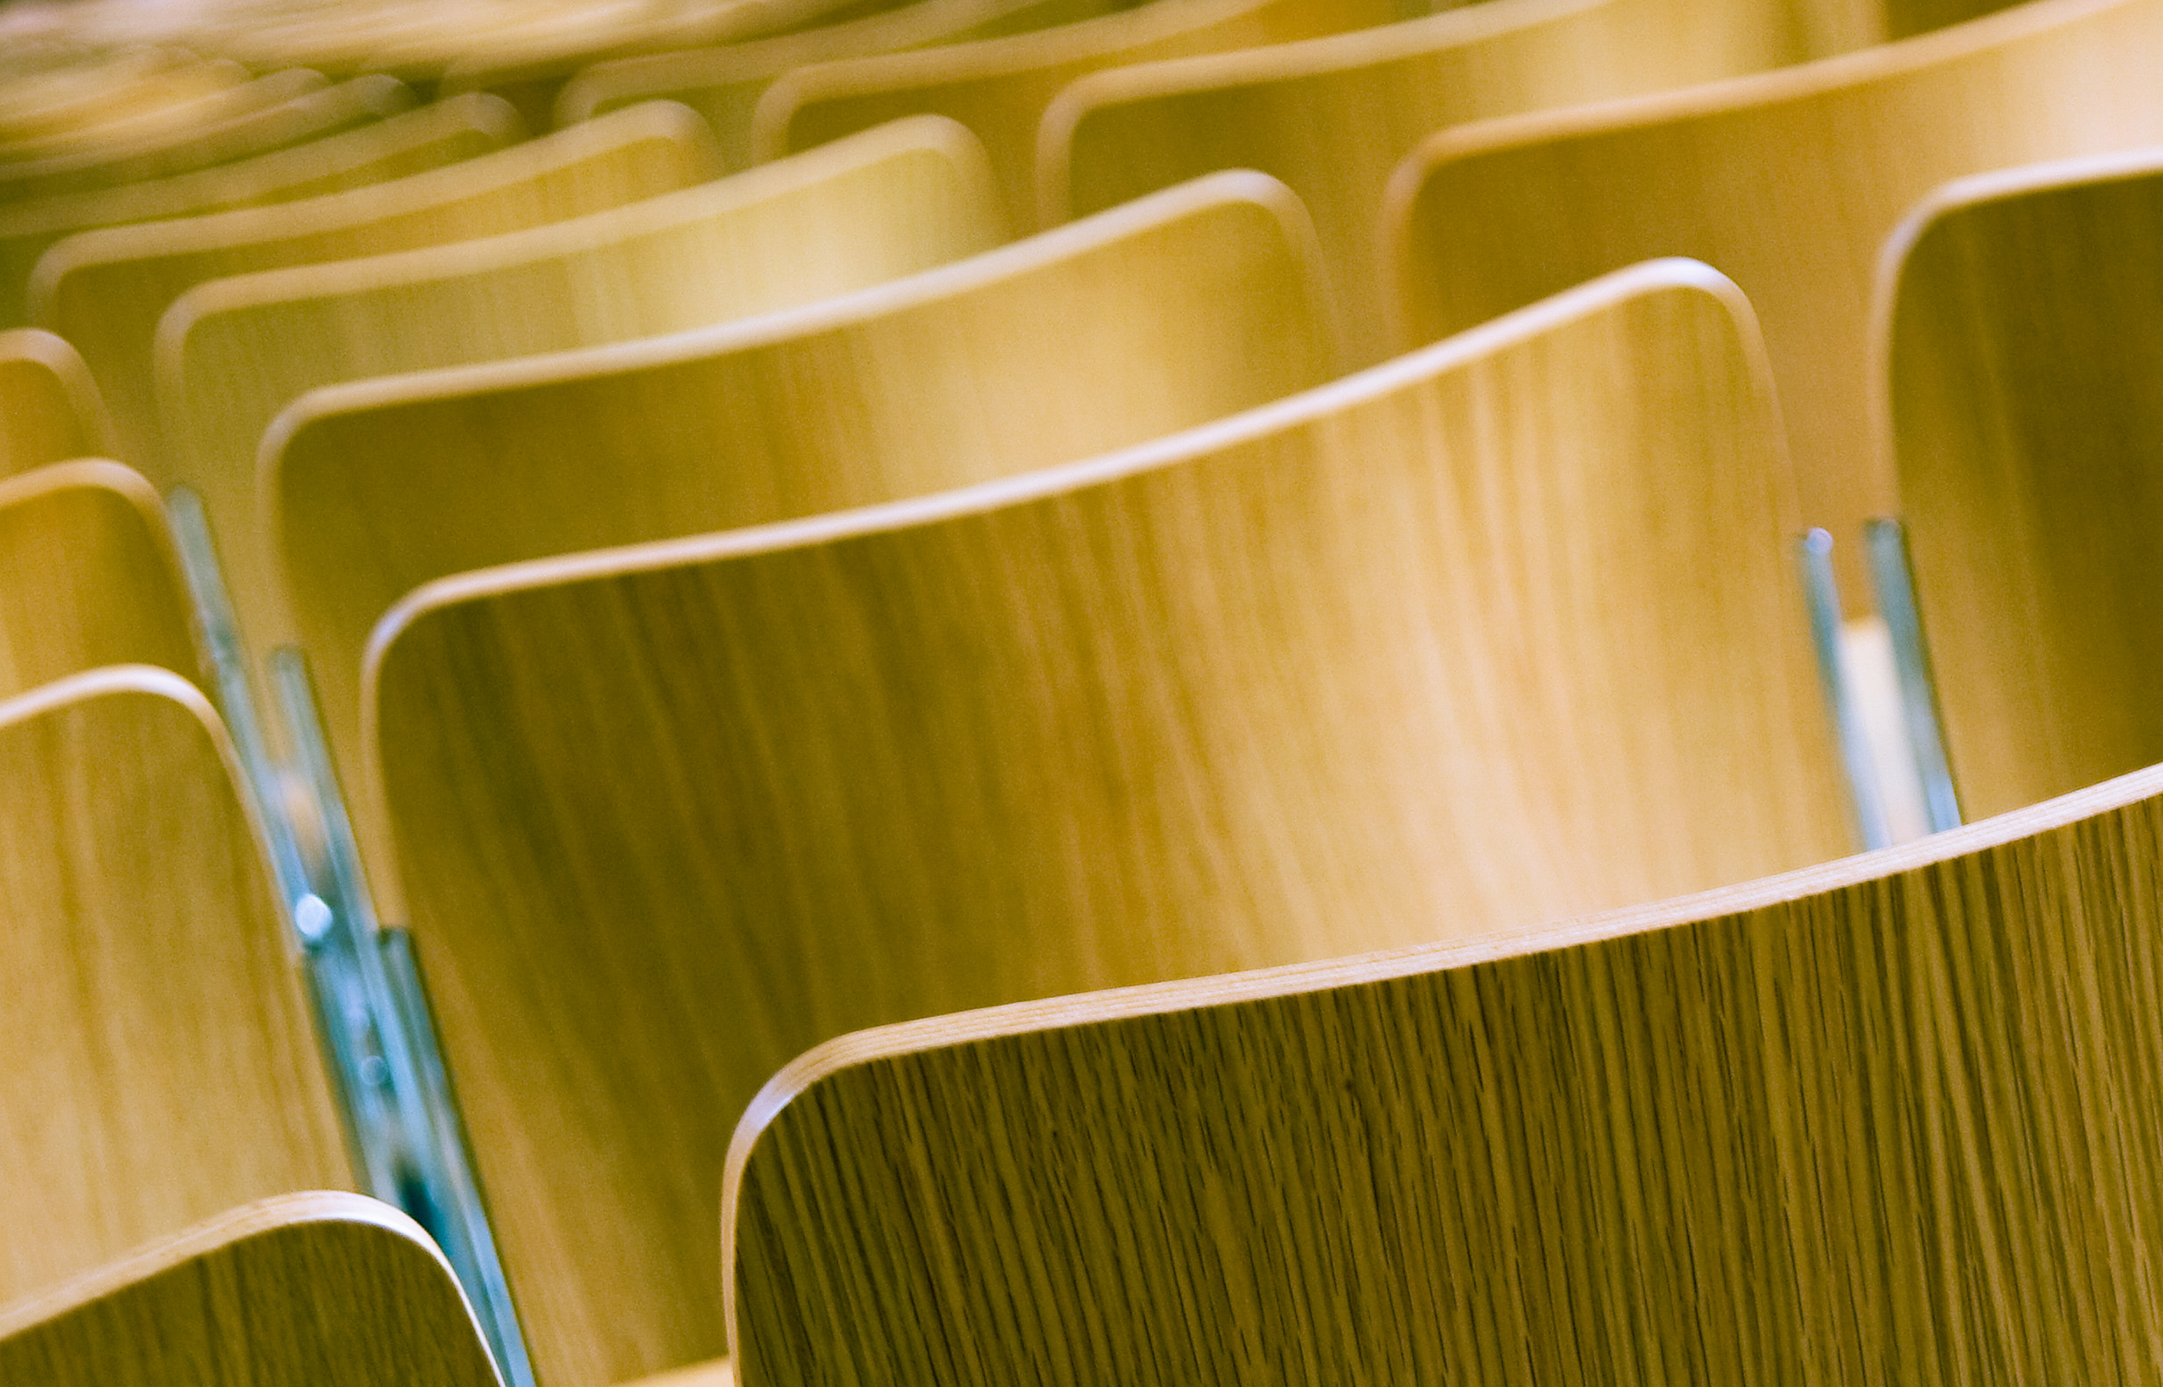 Close-up view of lecture hall chairs